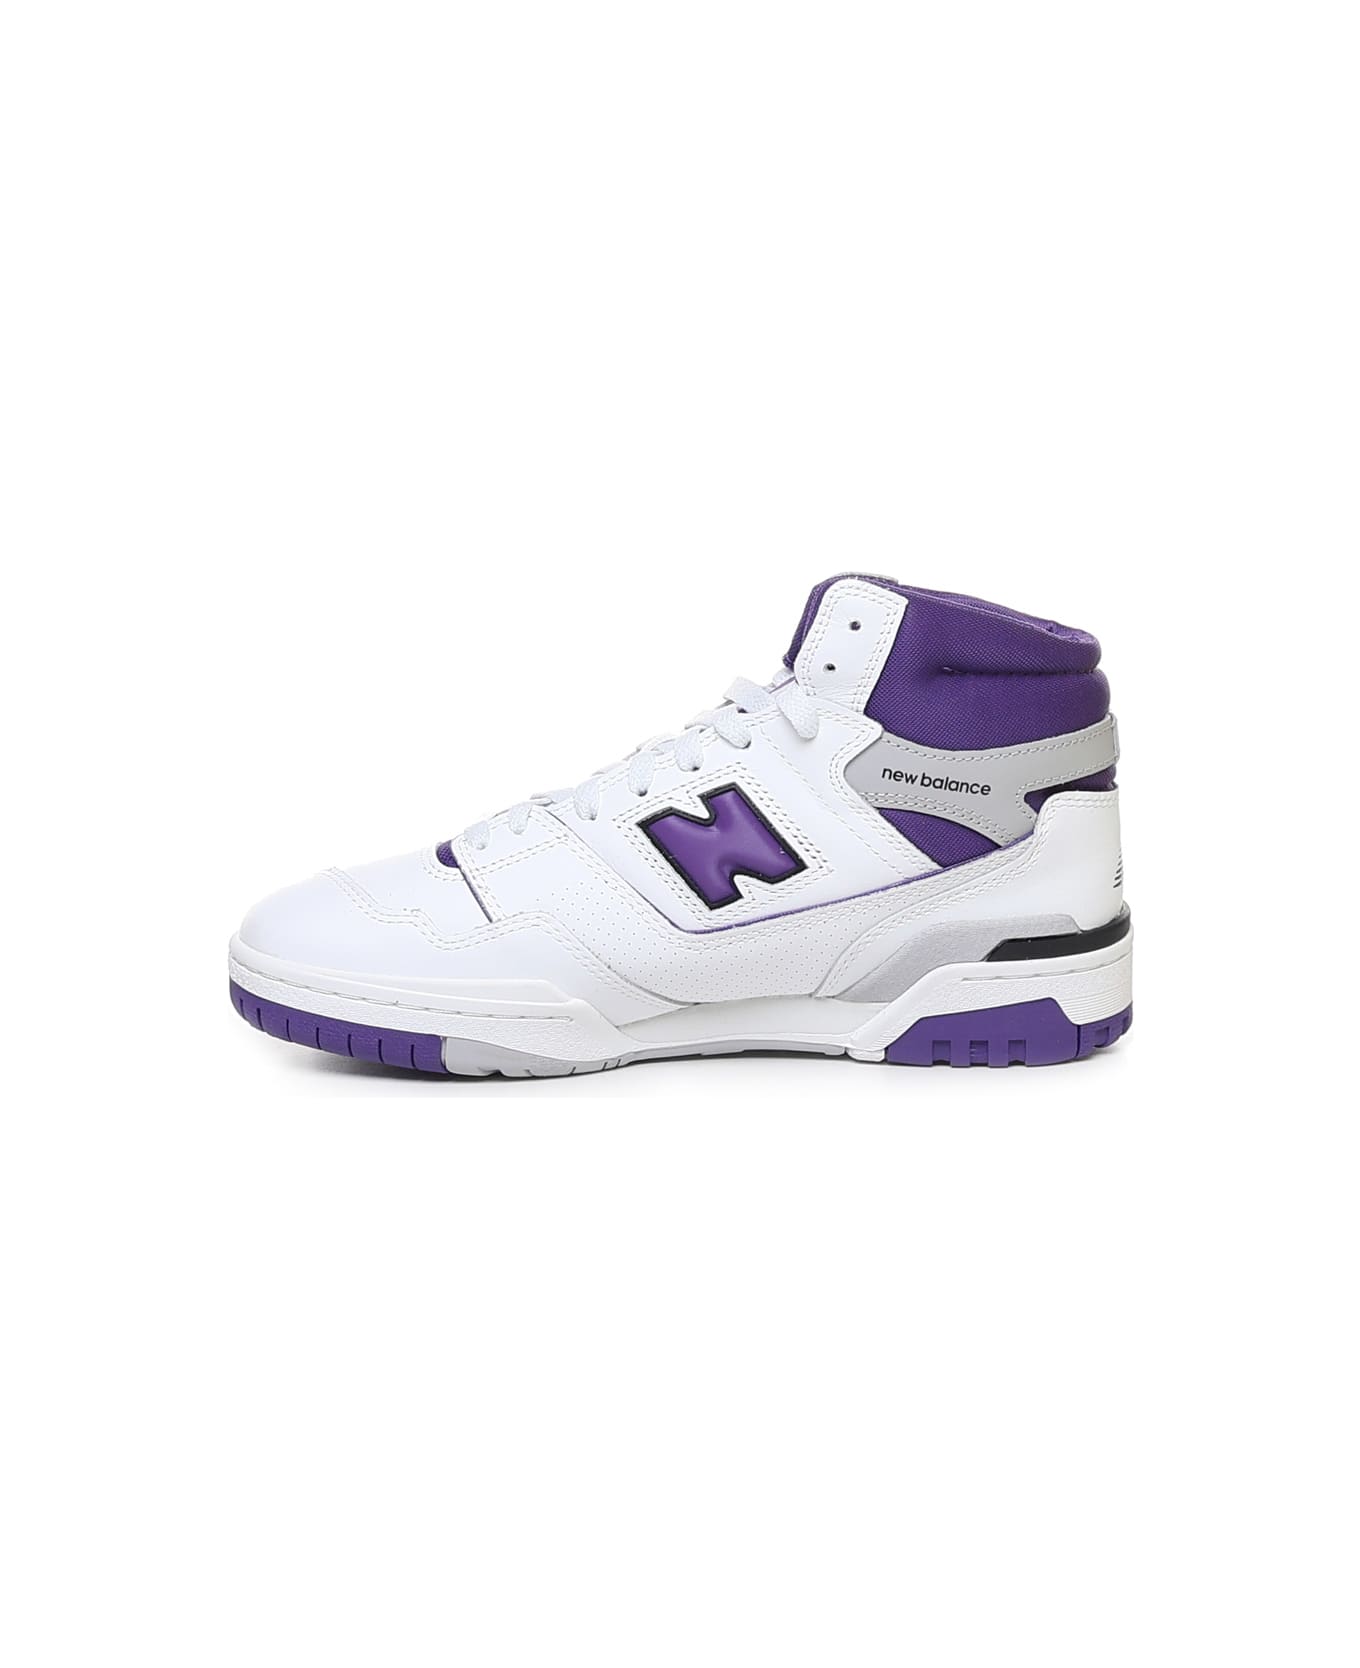 New Balance Sneakers 550 Lifestyle High - White